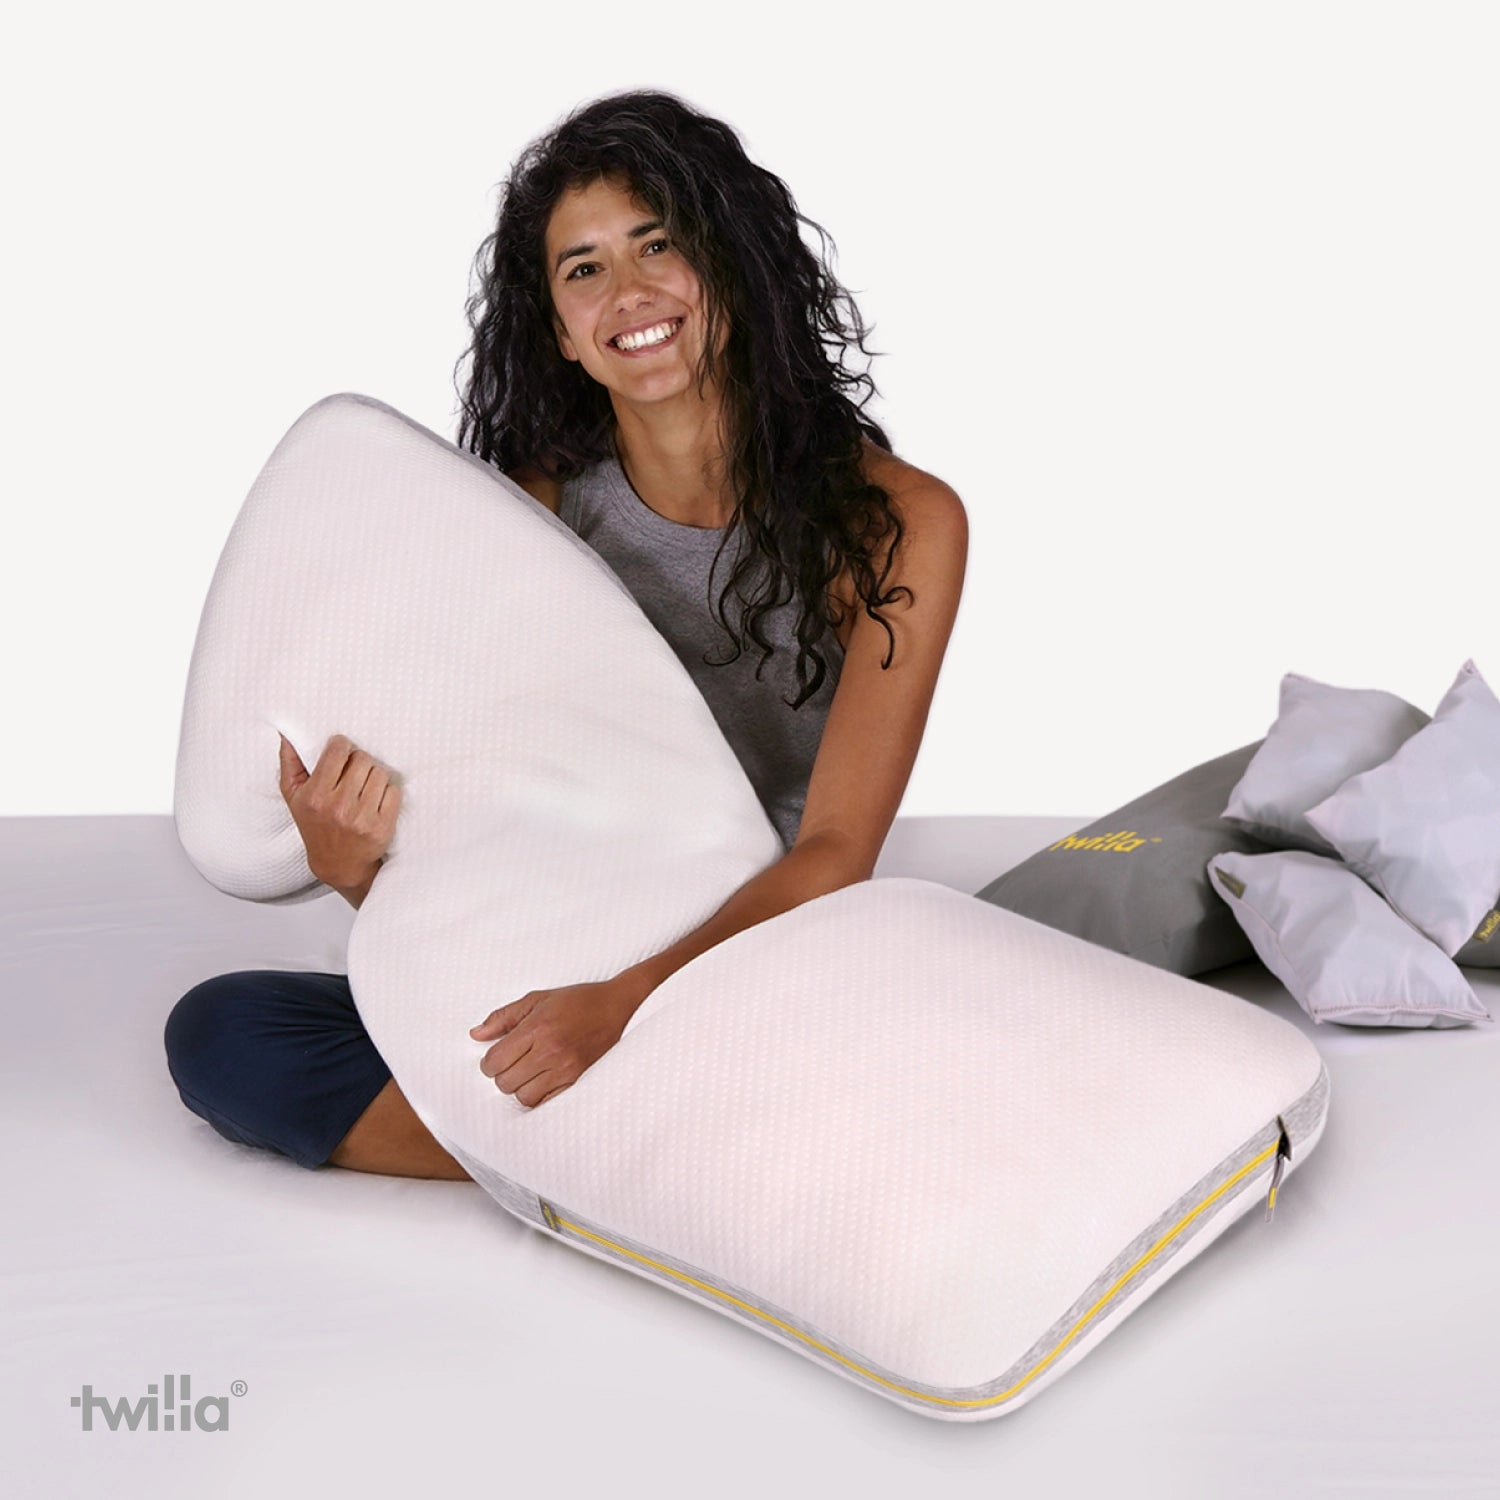 Twilla Adjustable Body Pillow | Great for All Body Types | Customizable Support with Patented Pod System | Premium Hybrid Cooling-Comfort Materials